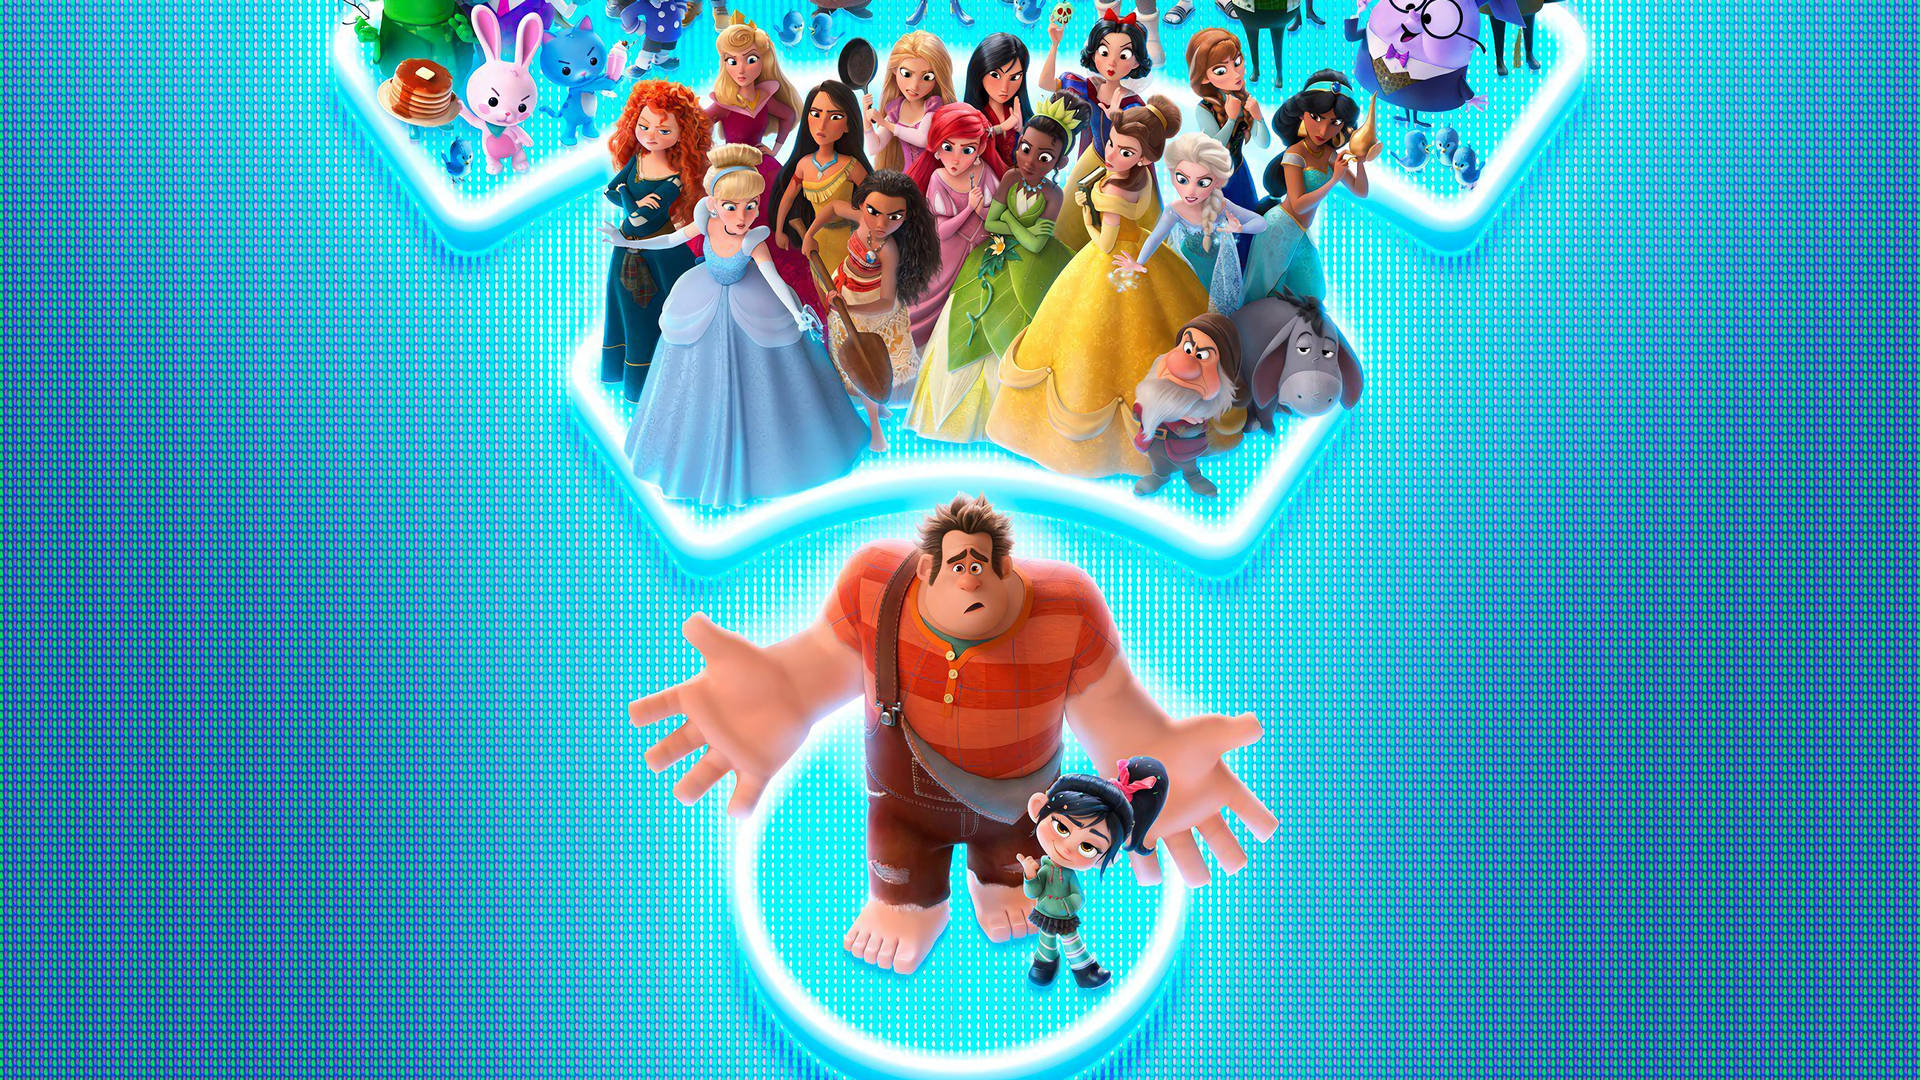 Wreck-it Ralph 2 Internet Characters Background